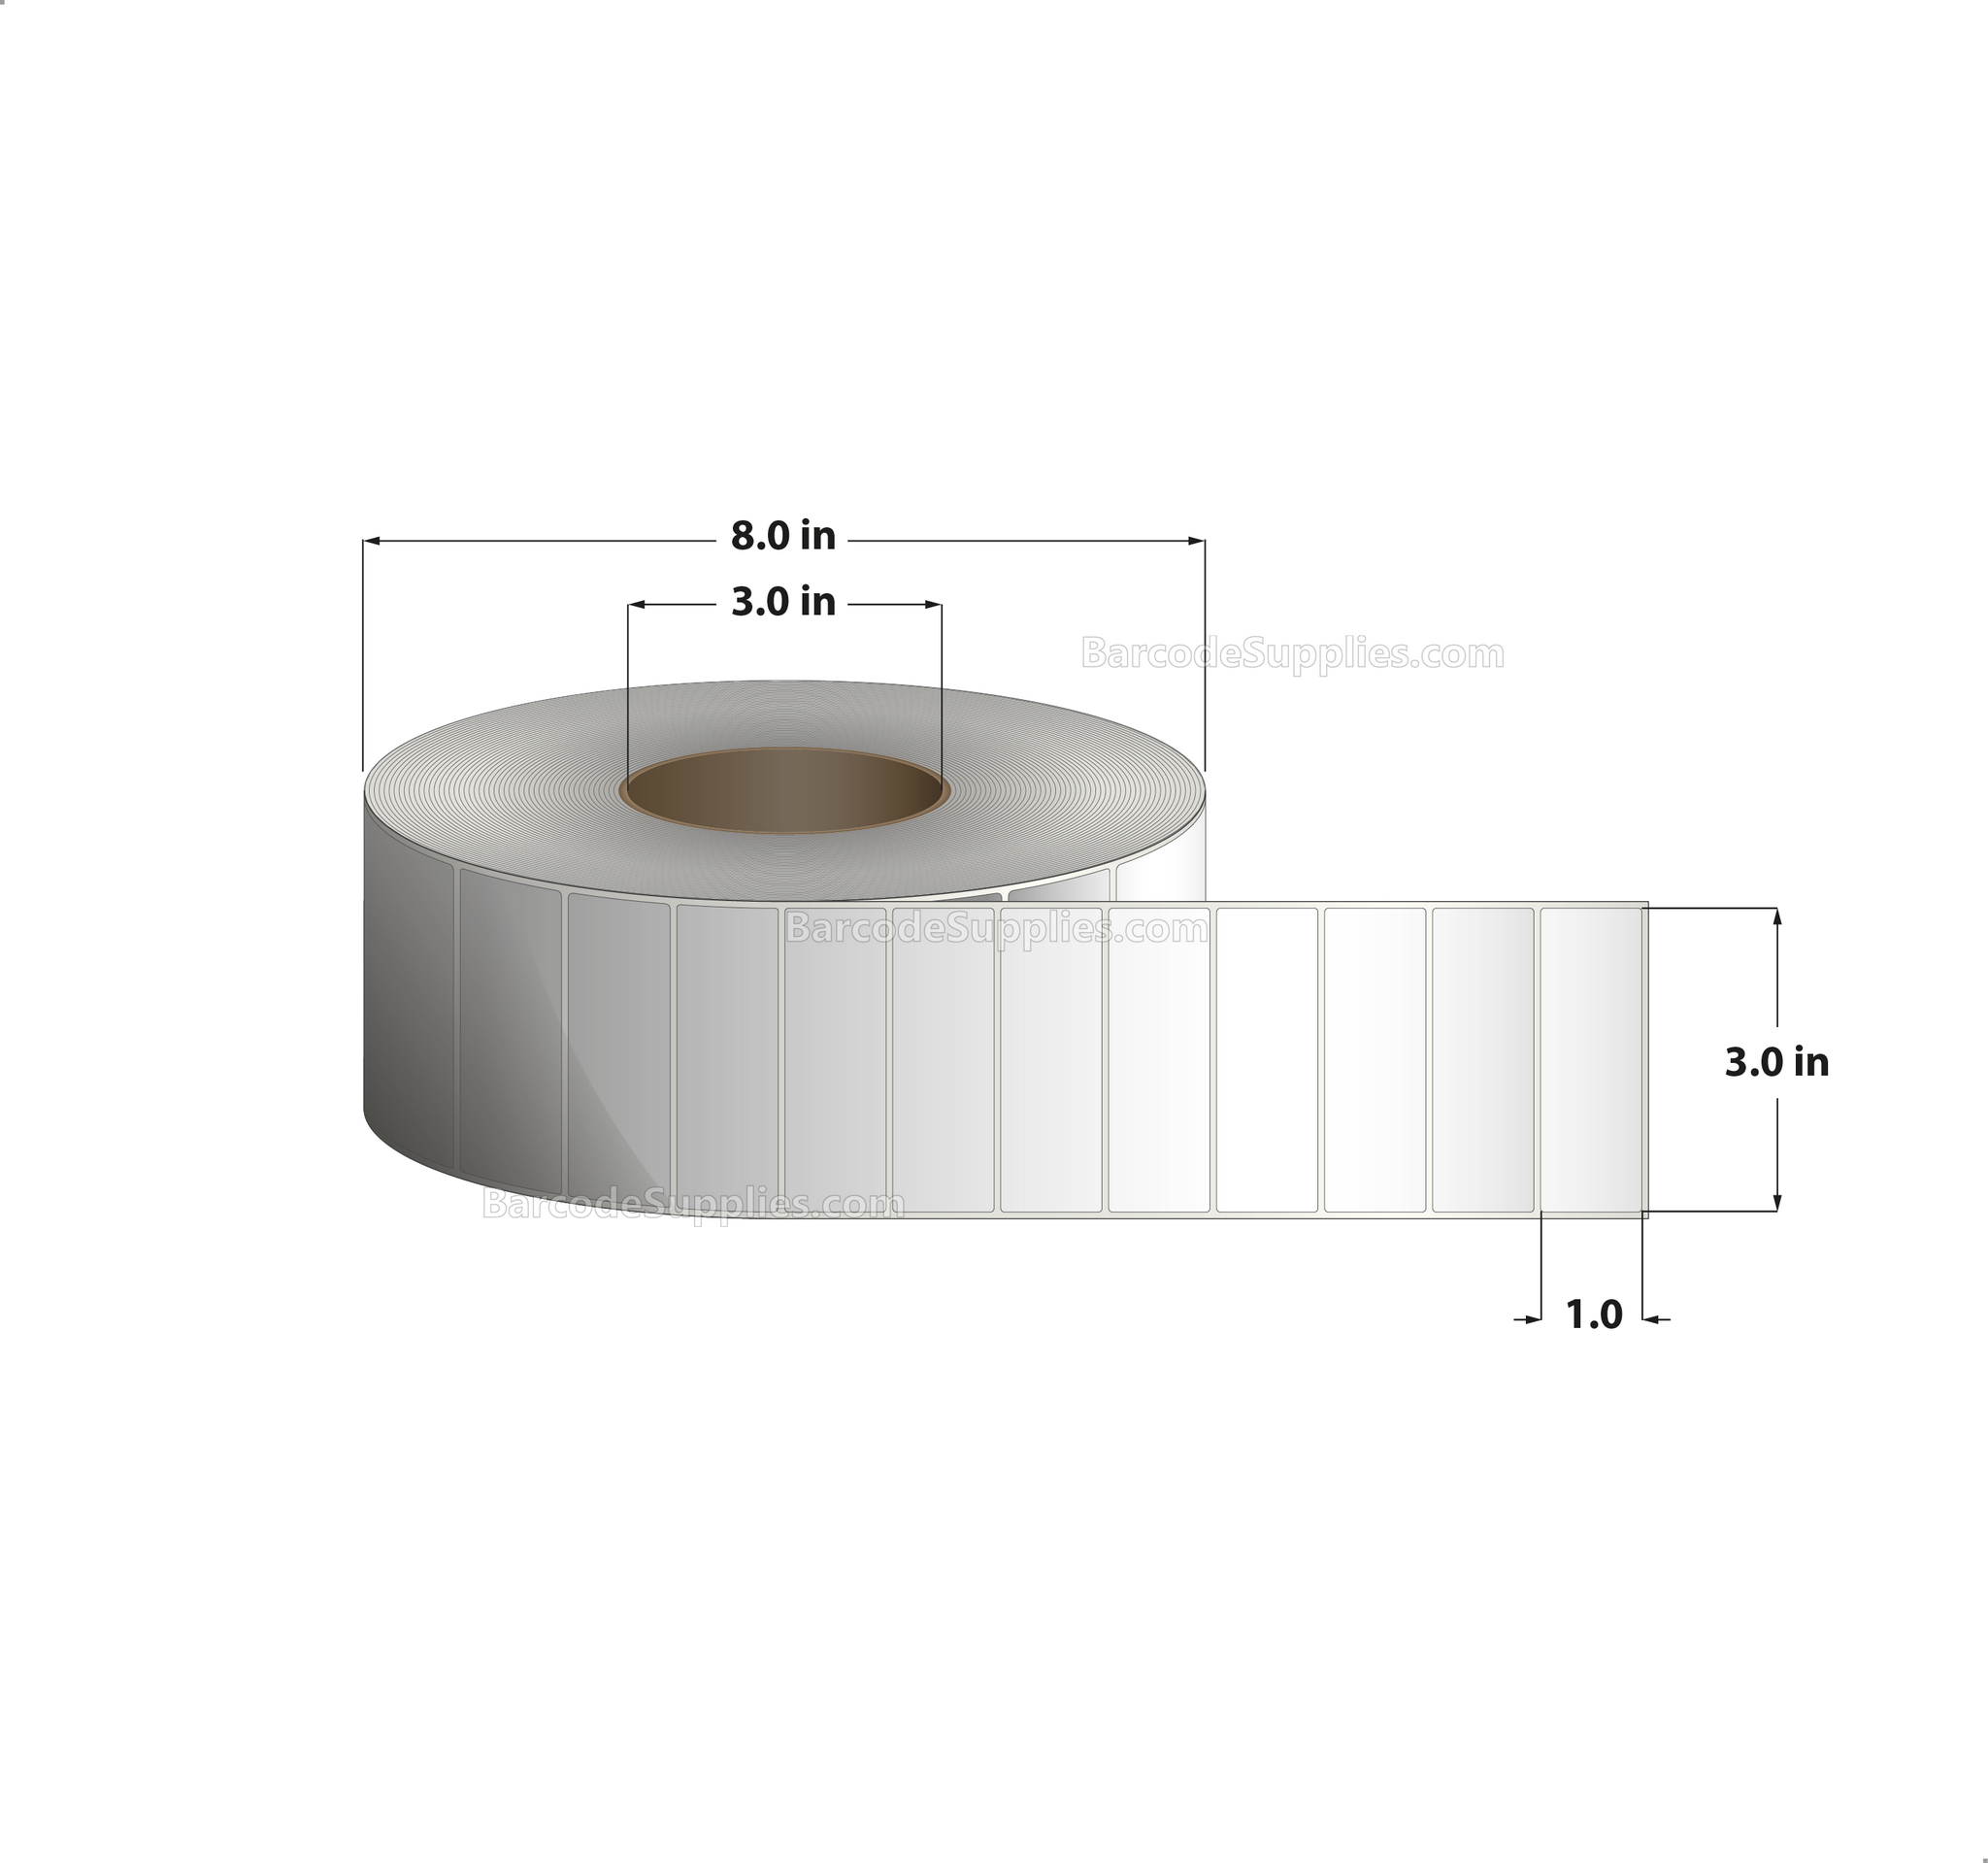 3 x 1 Thermal Transfer White Labels With Permanent Acrylic Adhesive - Not Perforated - 5500 Labels Per Roll - Carton Of 6 Rolls - 33000 Labels Total - MPN: TH31-1